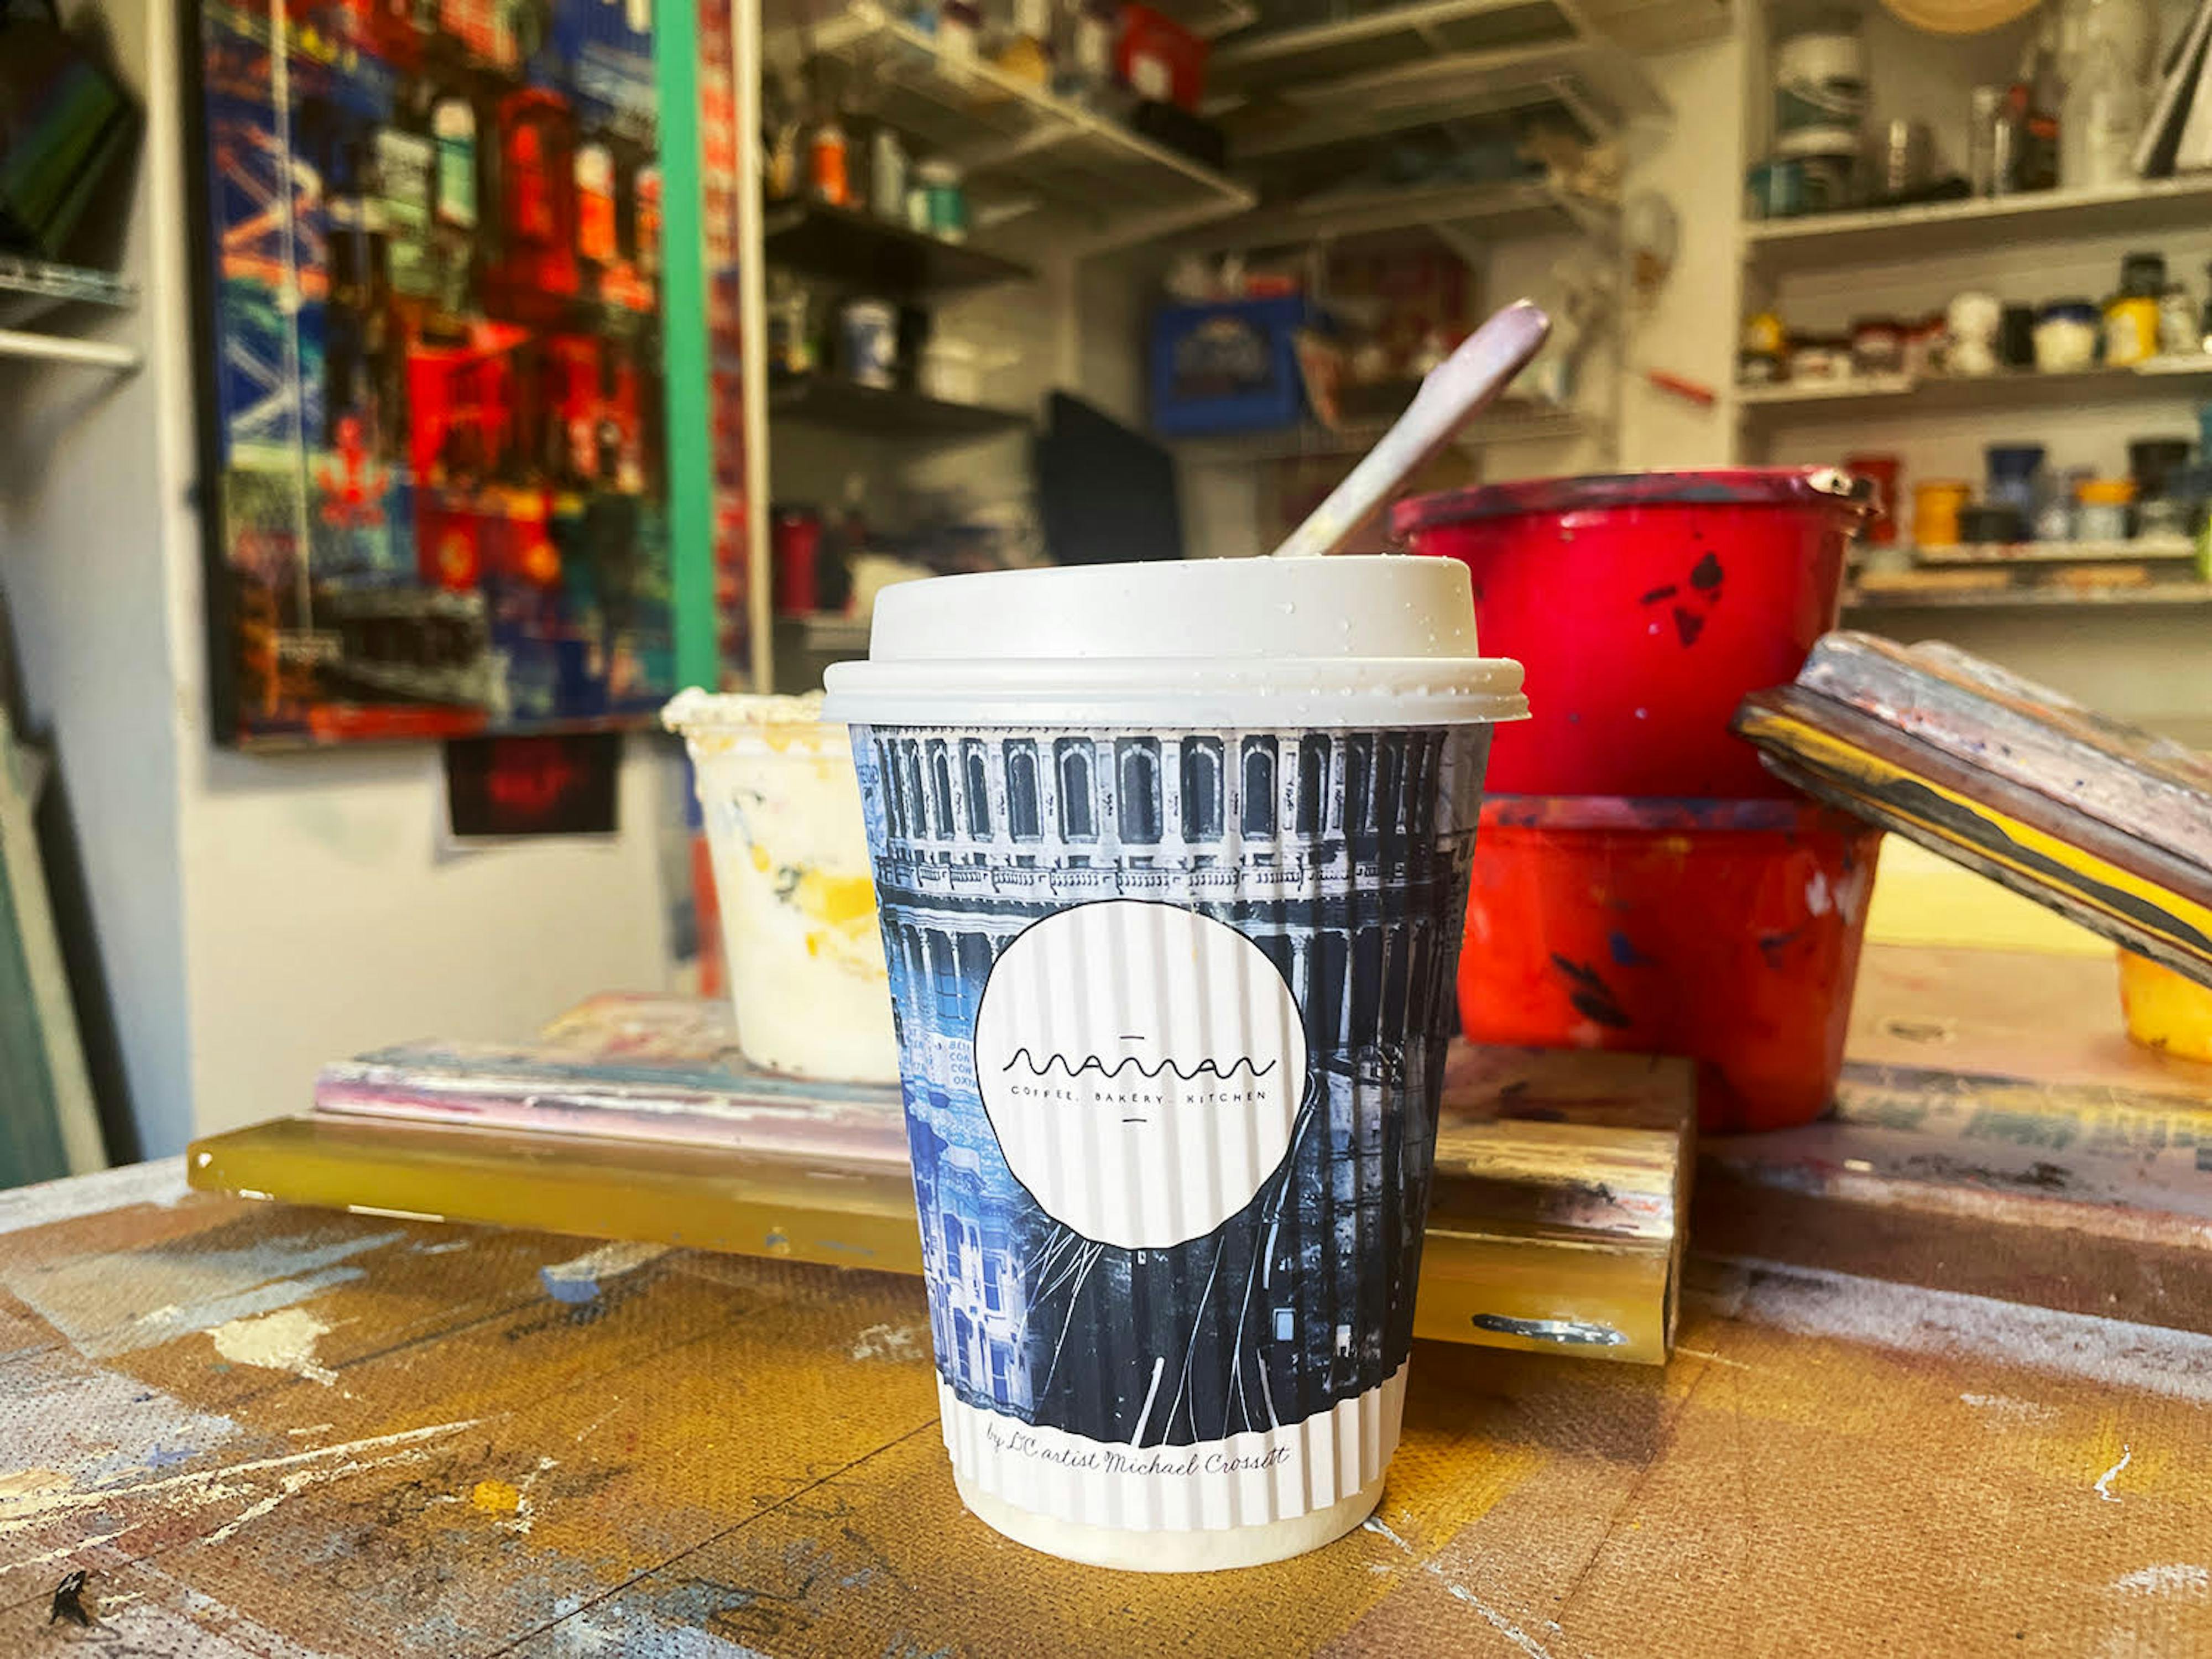 maman to go cup in michael's studio